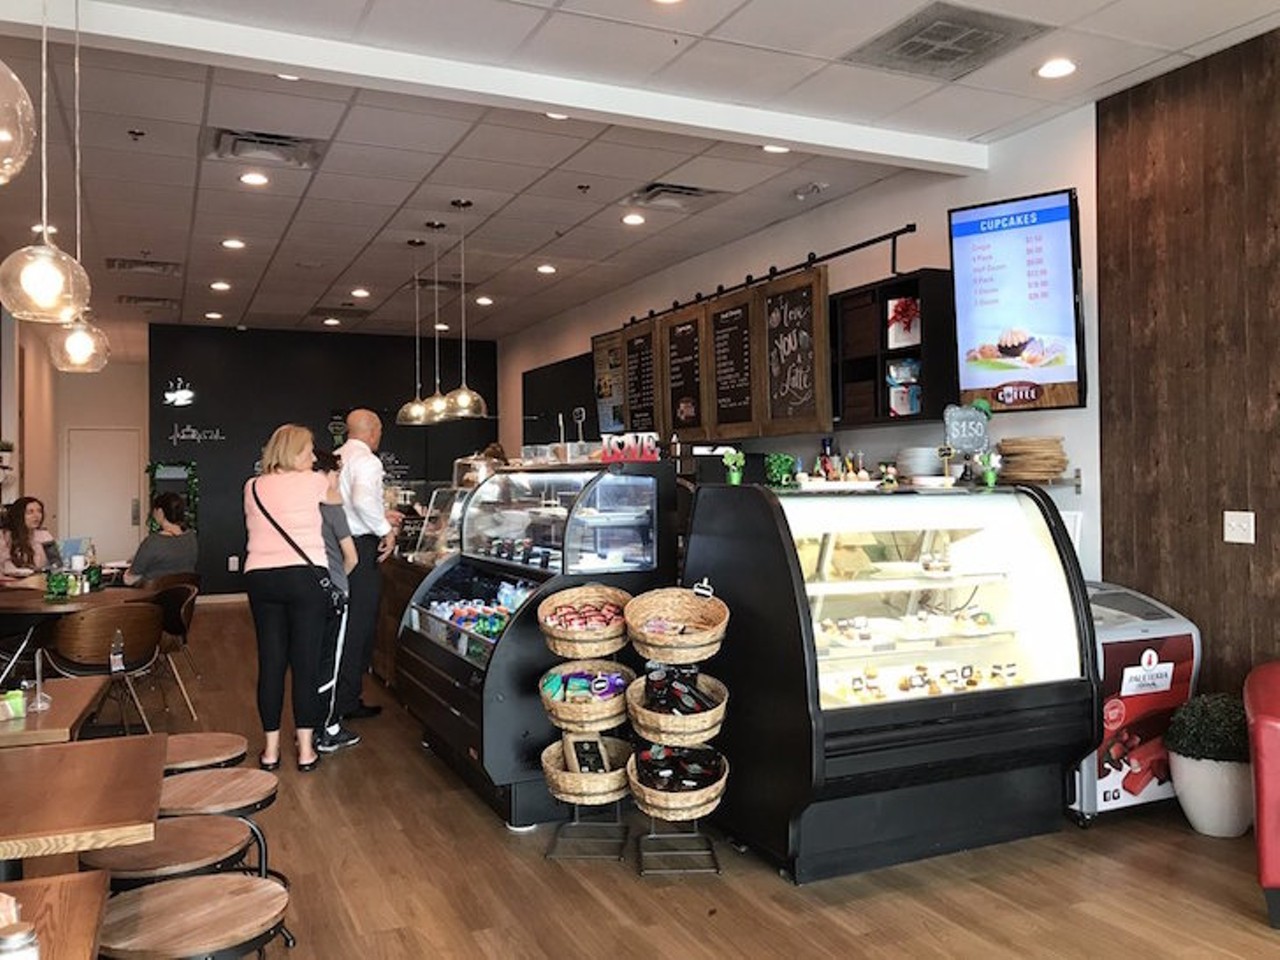 Ok, But First Coffee  
7535 W. Sand Lake Road, 407-757-2000
The name says it all. Pair your French toast, sandwich or fresh pastry with their Brazilian gourmet coffee selections. 
Photo via Yelp/Min D.